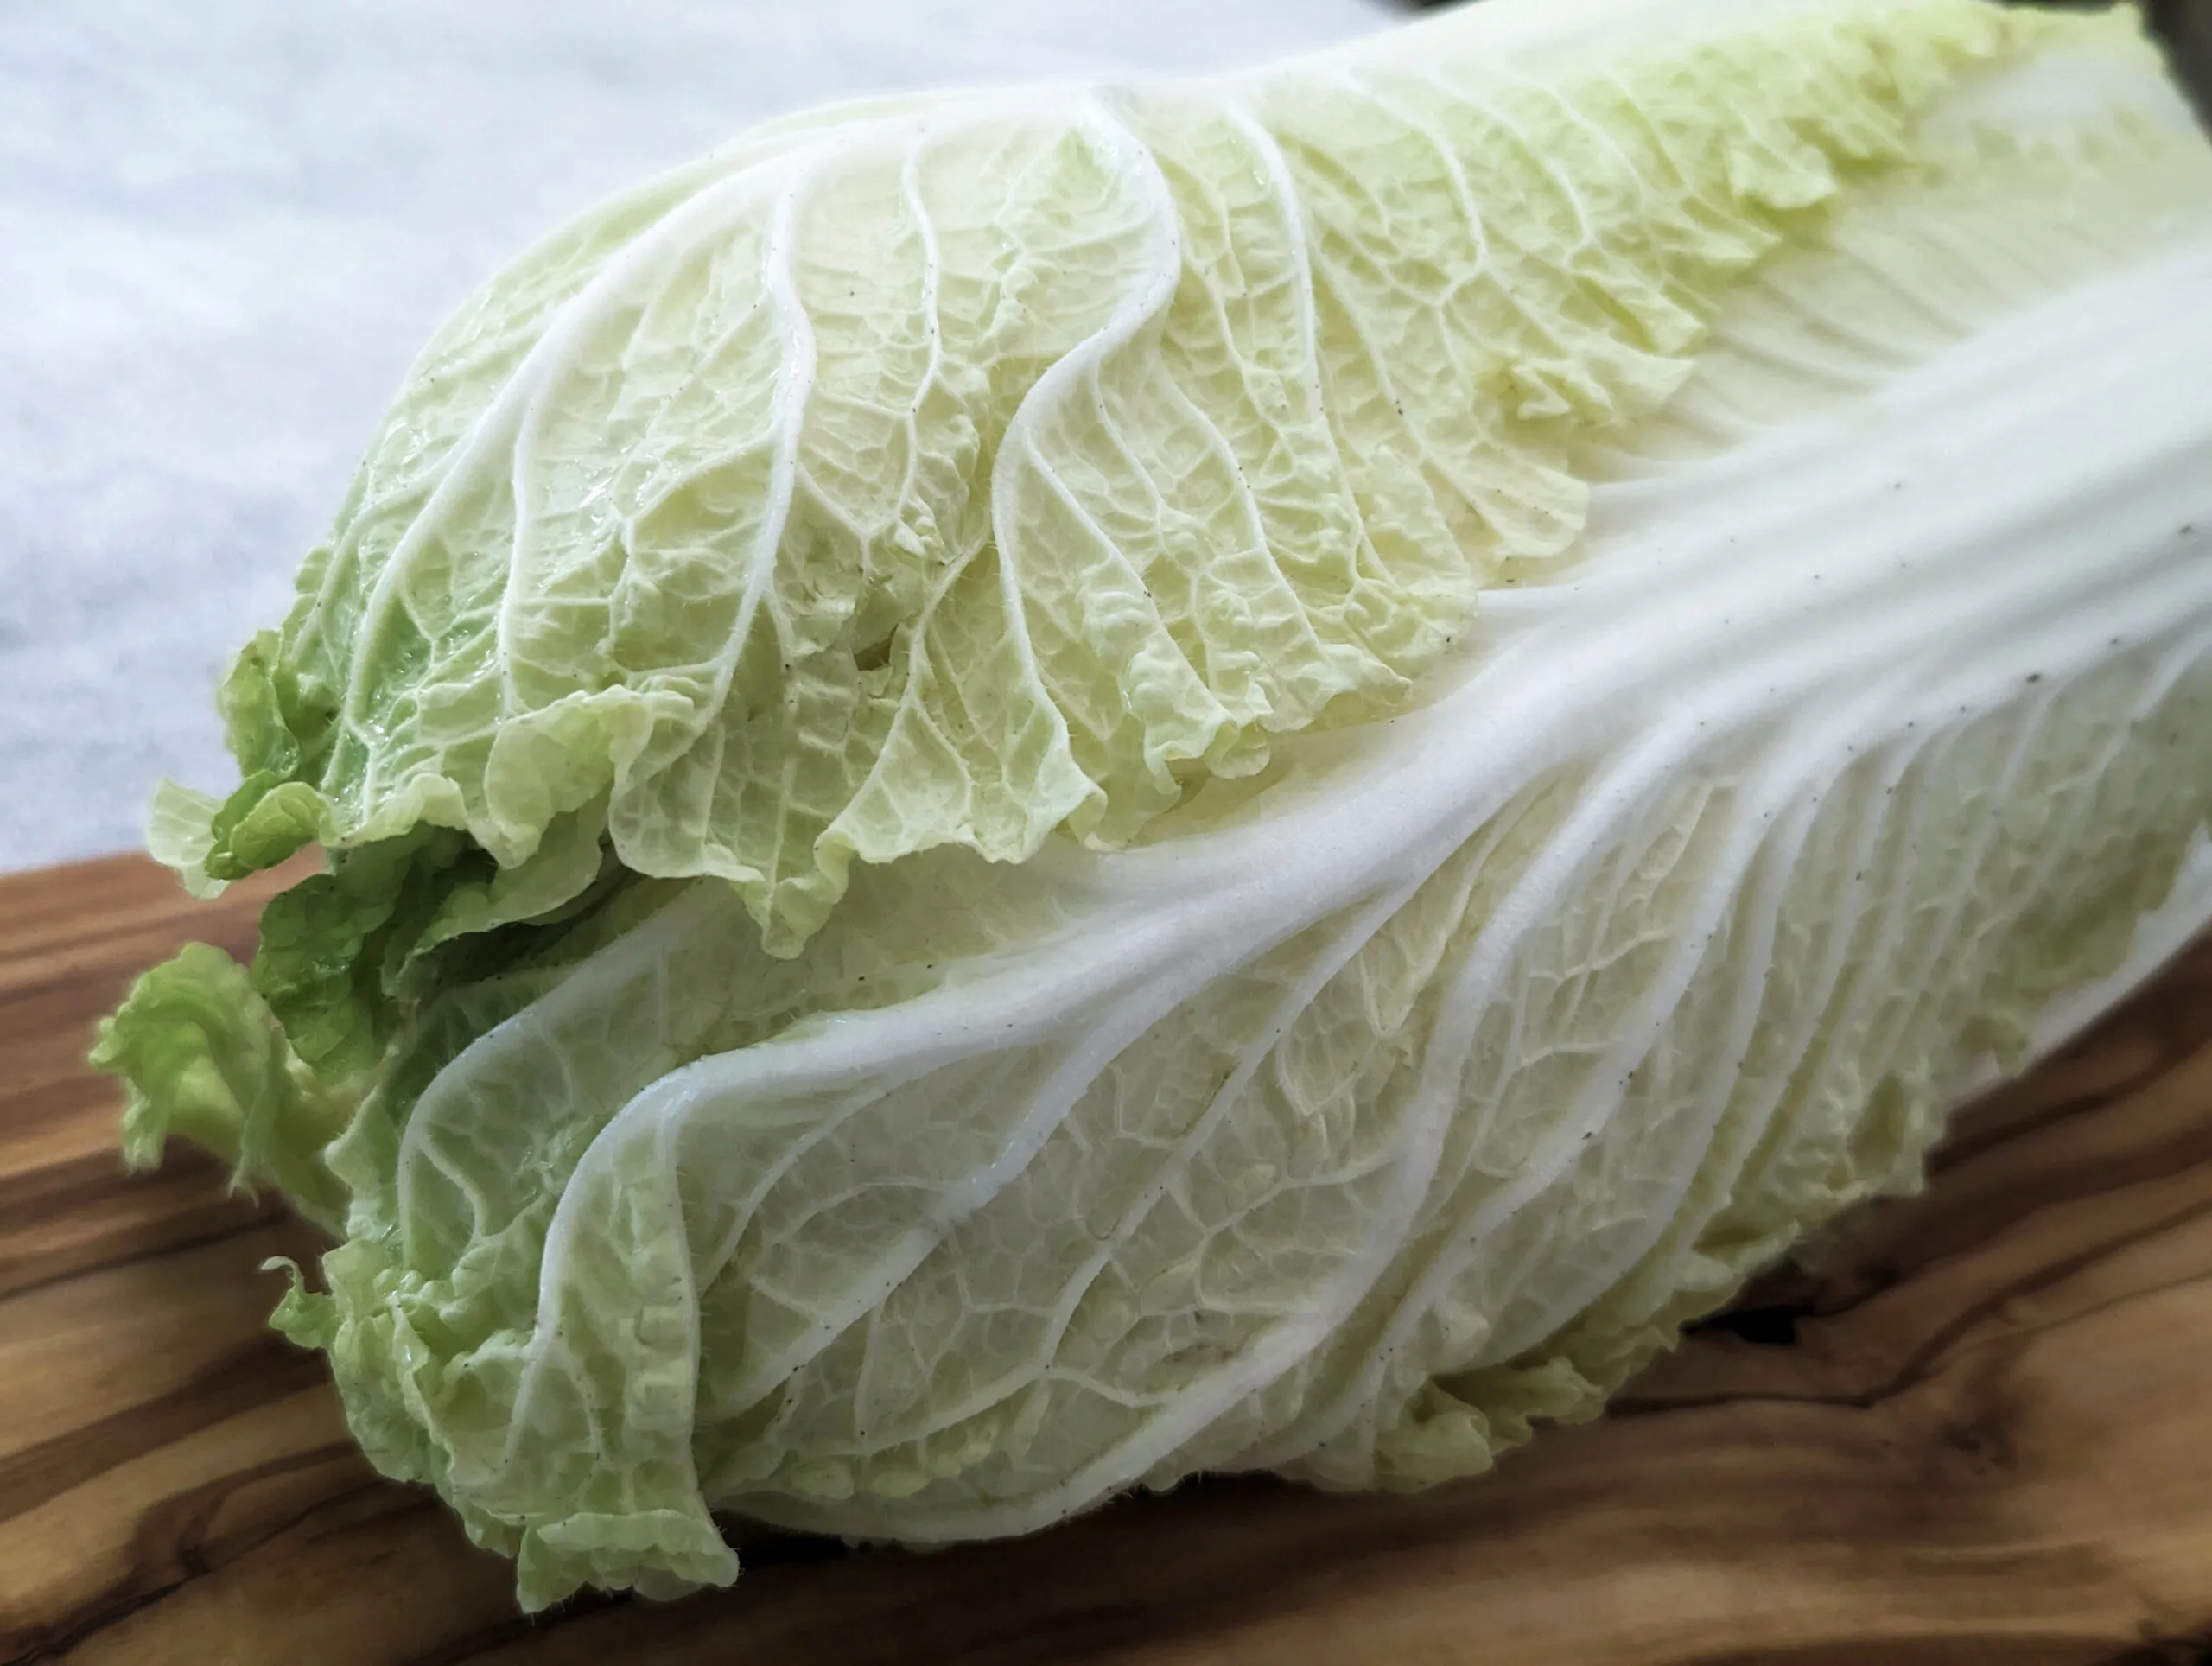 A side profile of a Napa cabbage on a cutting board.